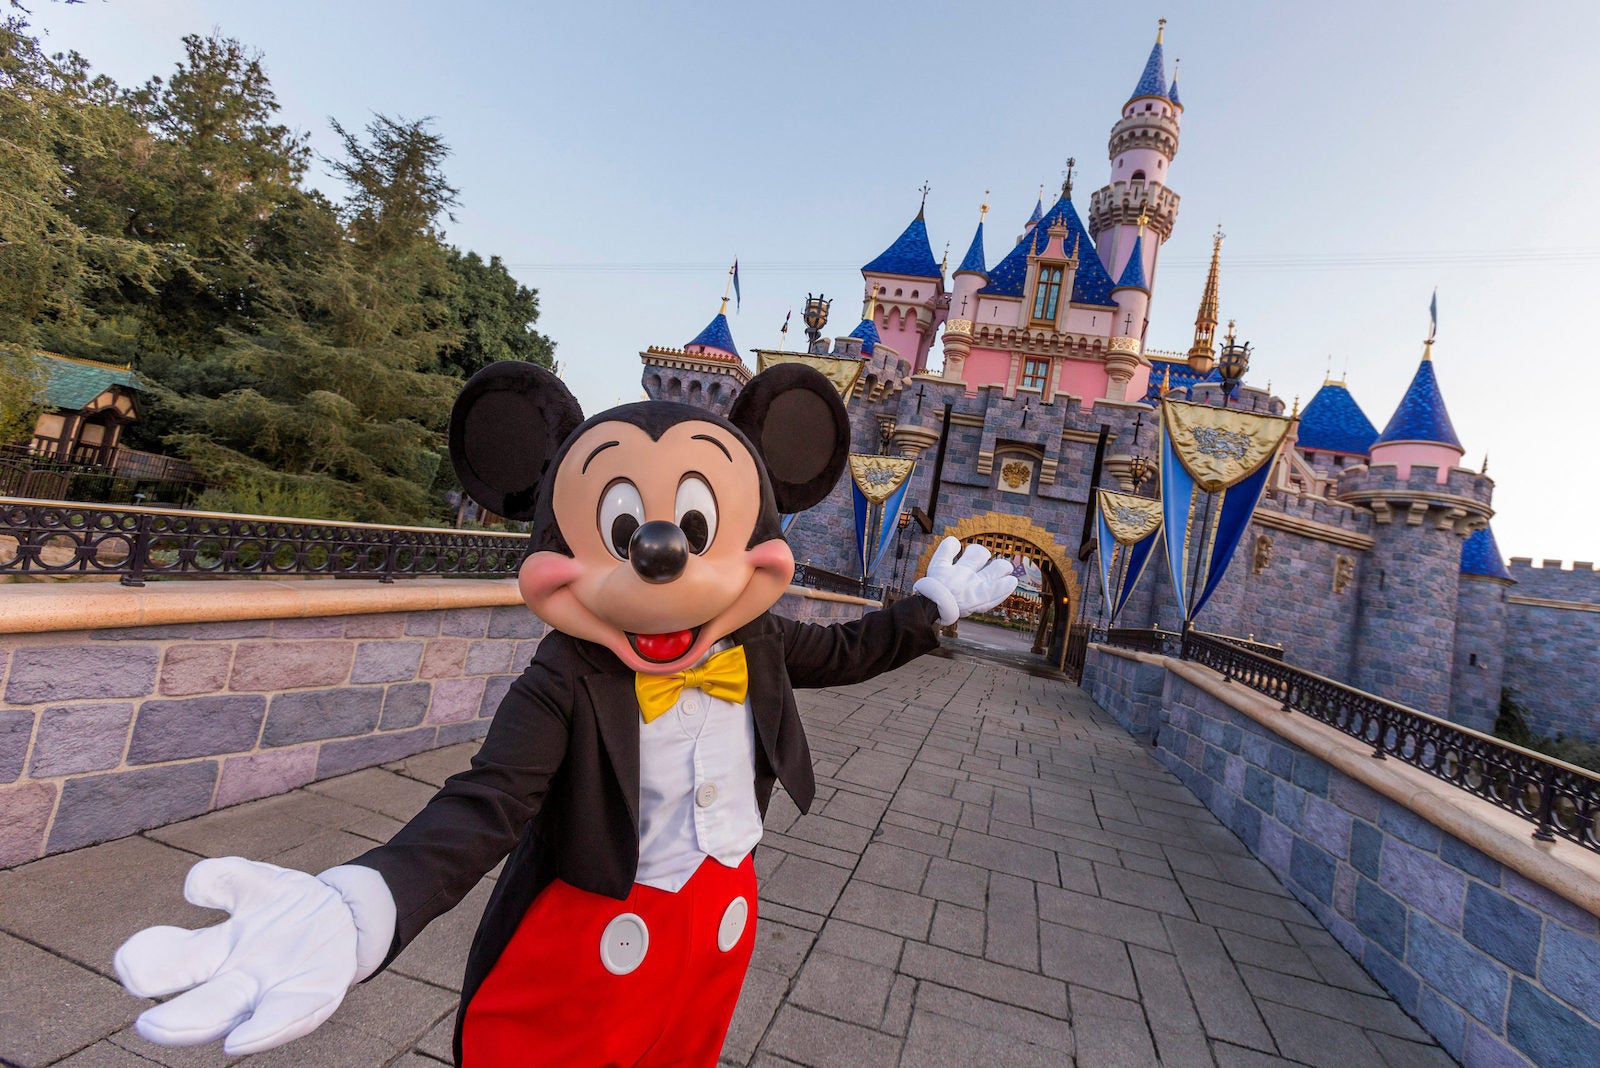 Disney Gift Cards Can Be Used to Pay for Disneyland Magic Key Passes 